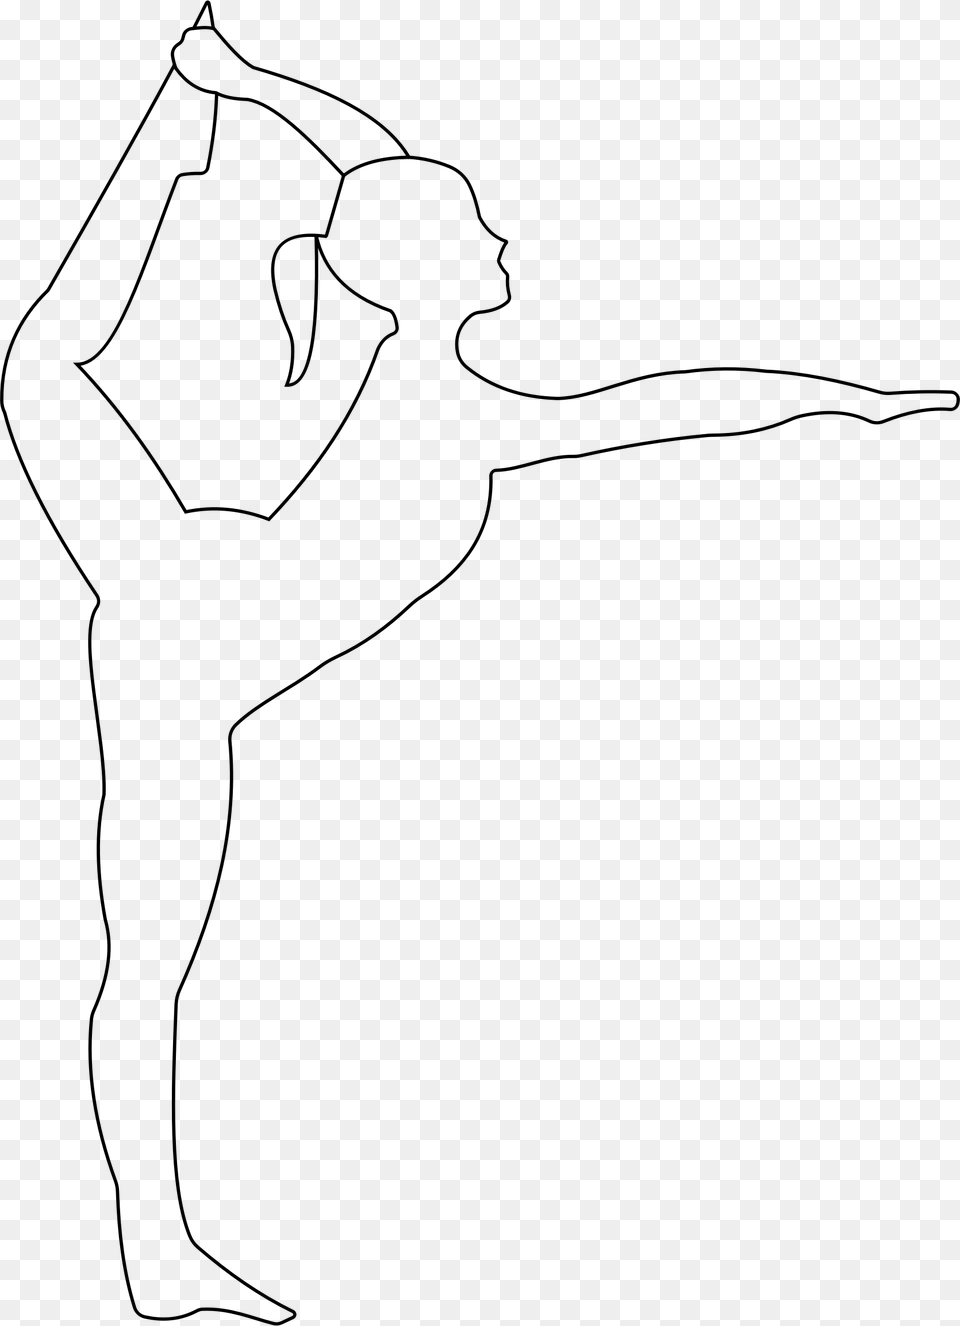 Stretching Ballerina Outline Clip Arts Ballerina Outline, Gray Free Png Download